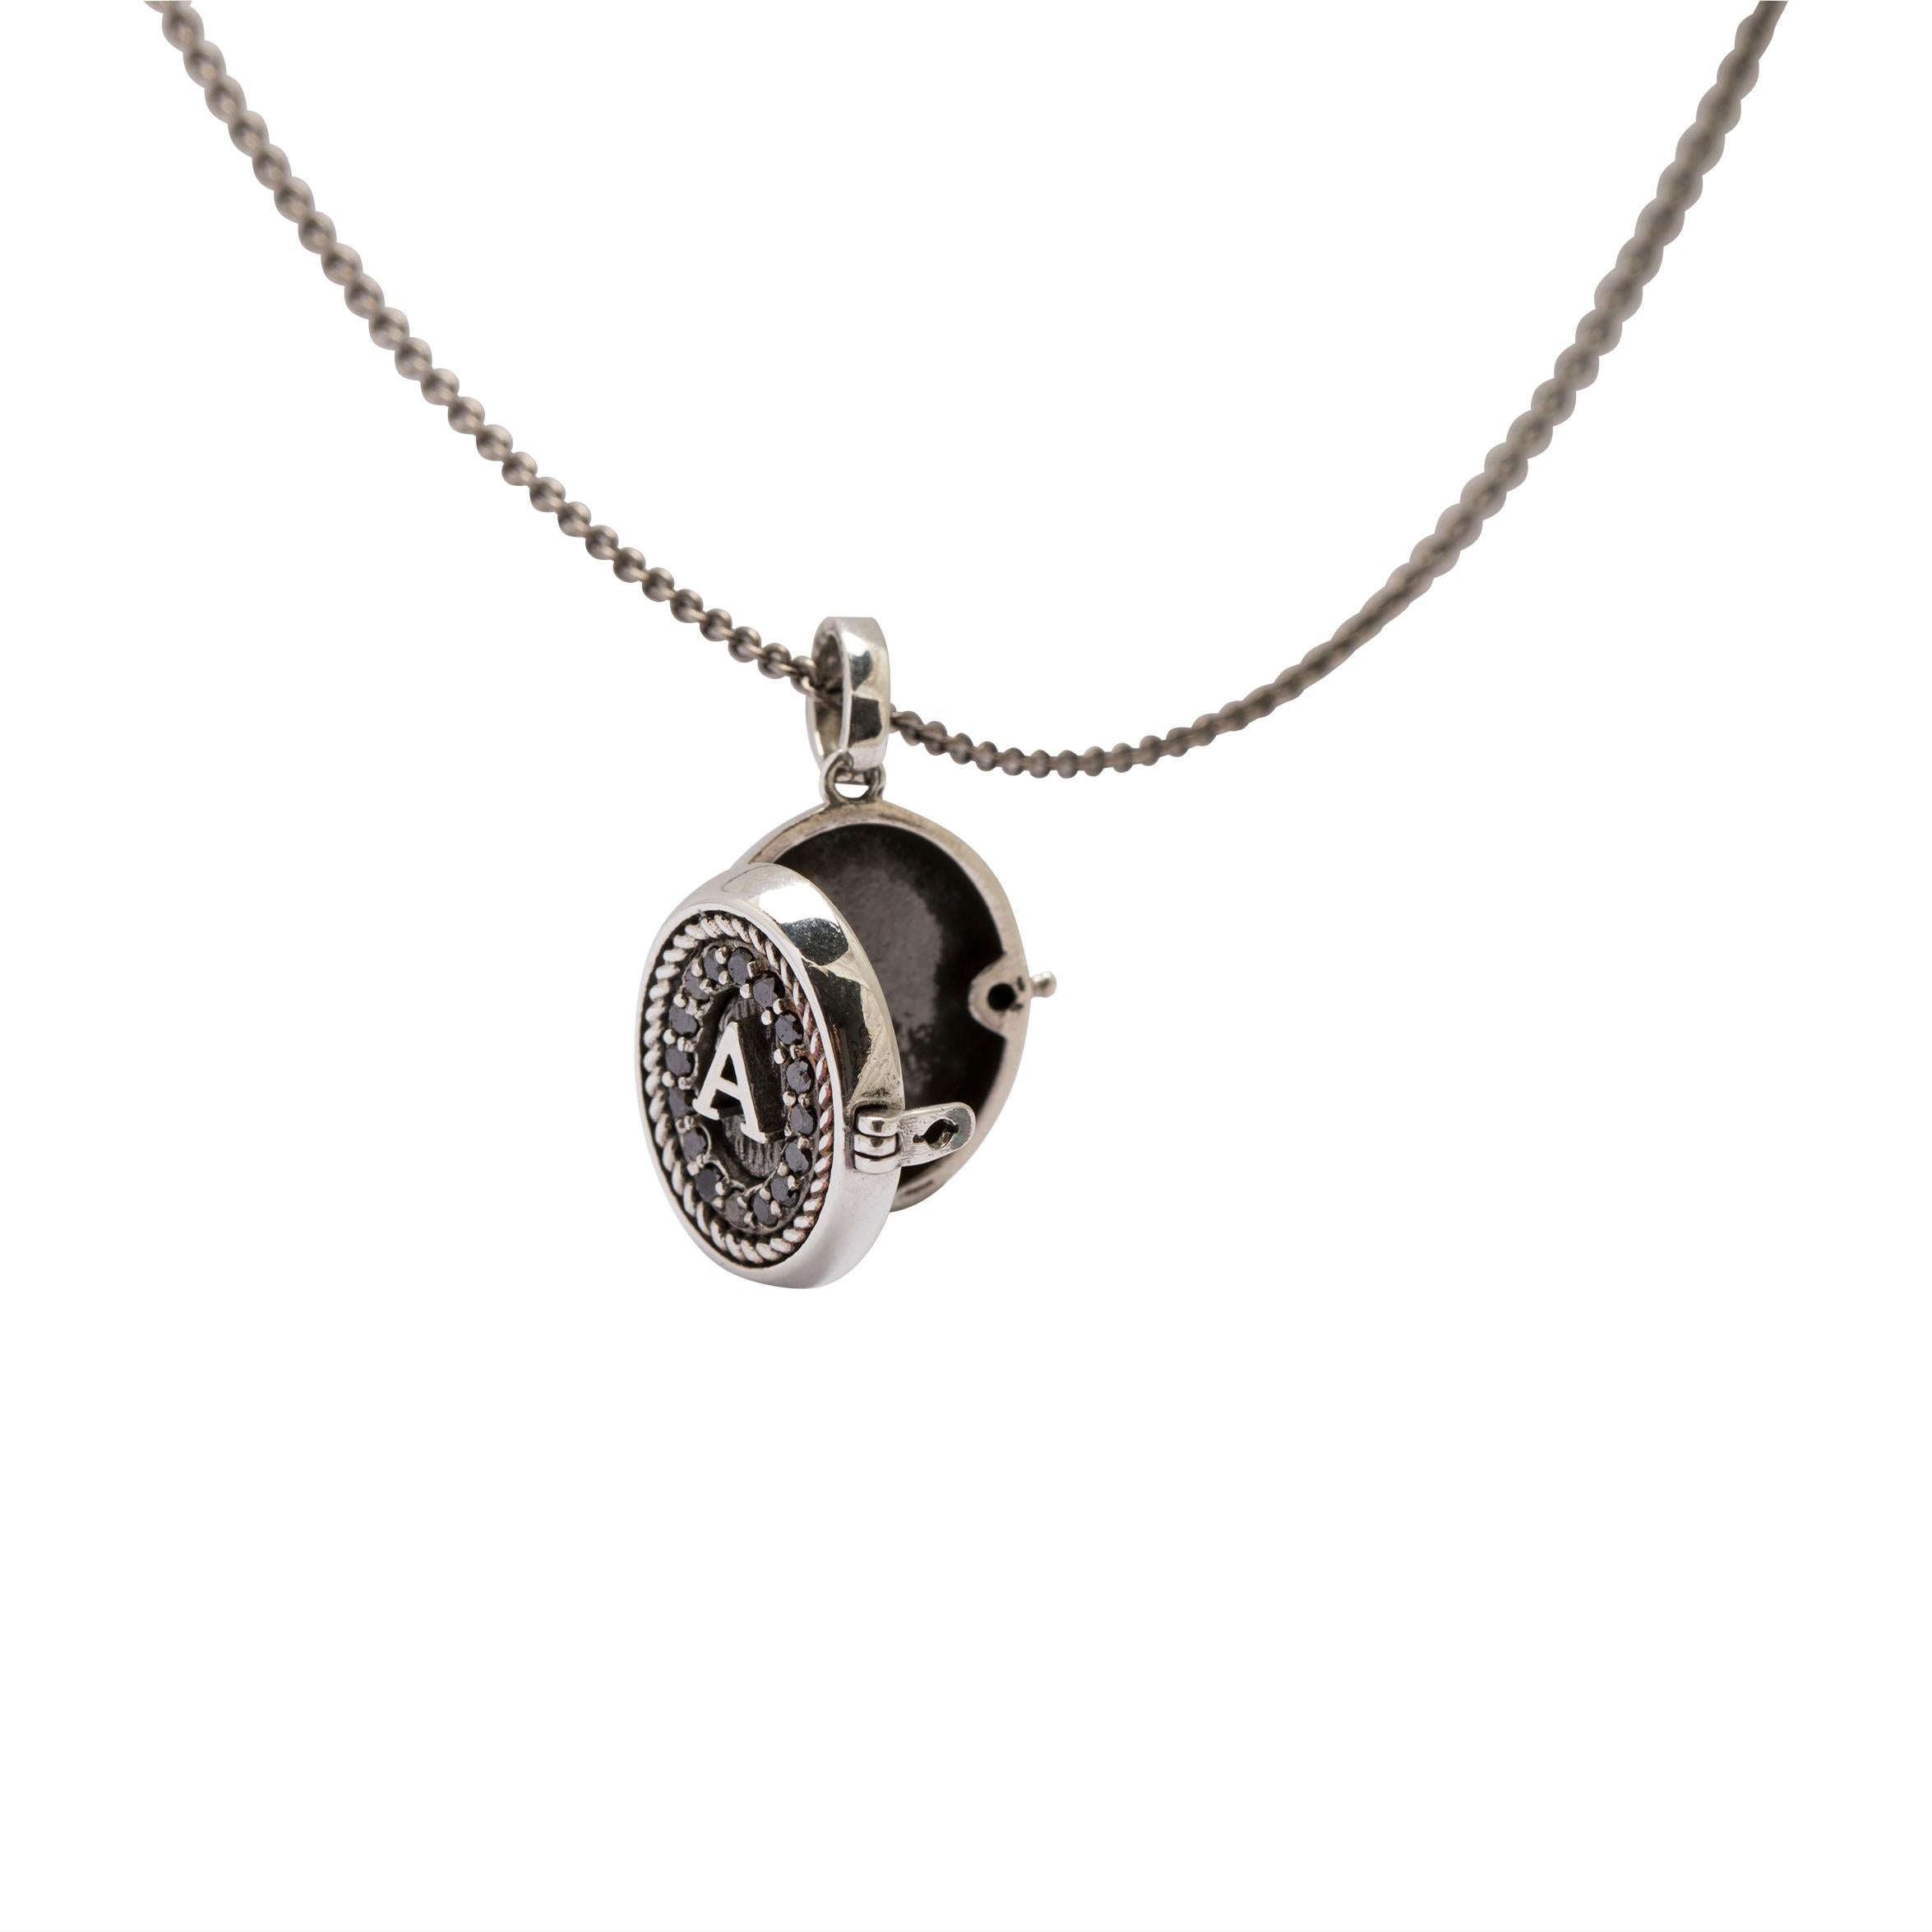 From a gift of love, here comes the signet locket pendant carrying your own name’s initials as a personal talisman, as the Roman aristocracy used. An evolution from IOSSELLIANI’s core rings collection, “Myfriendsring”  capsule collection includes a